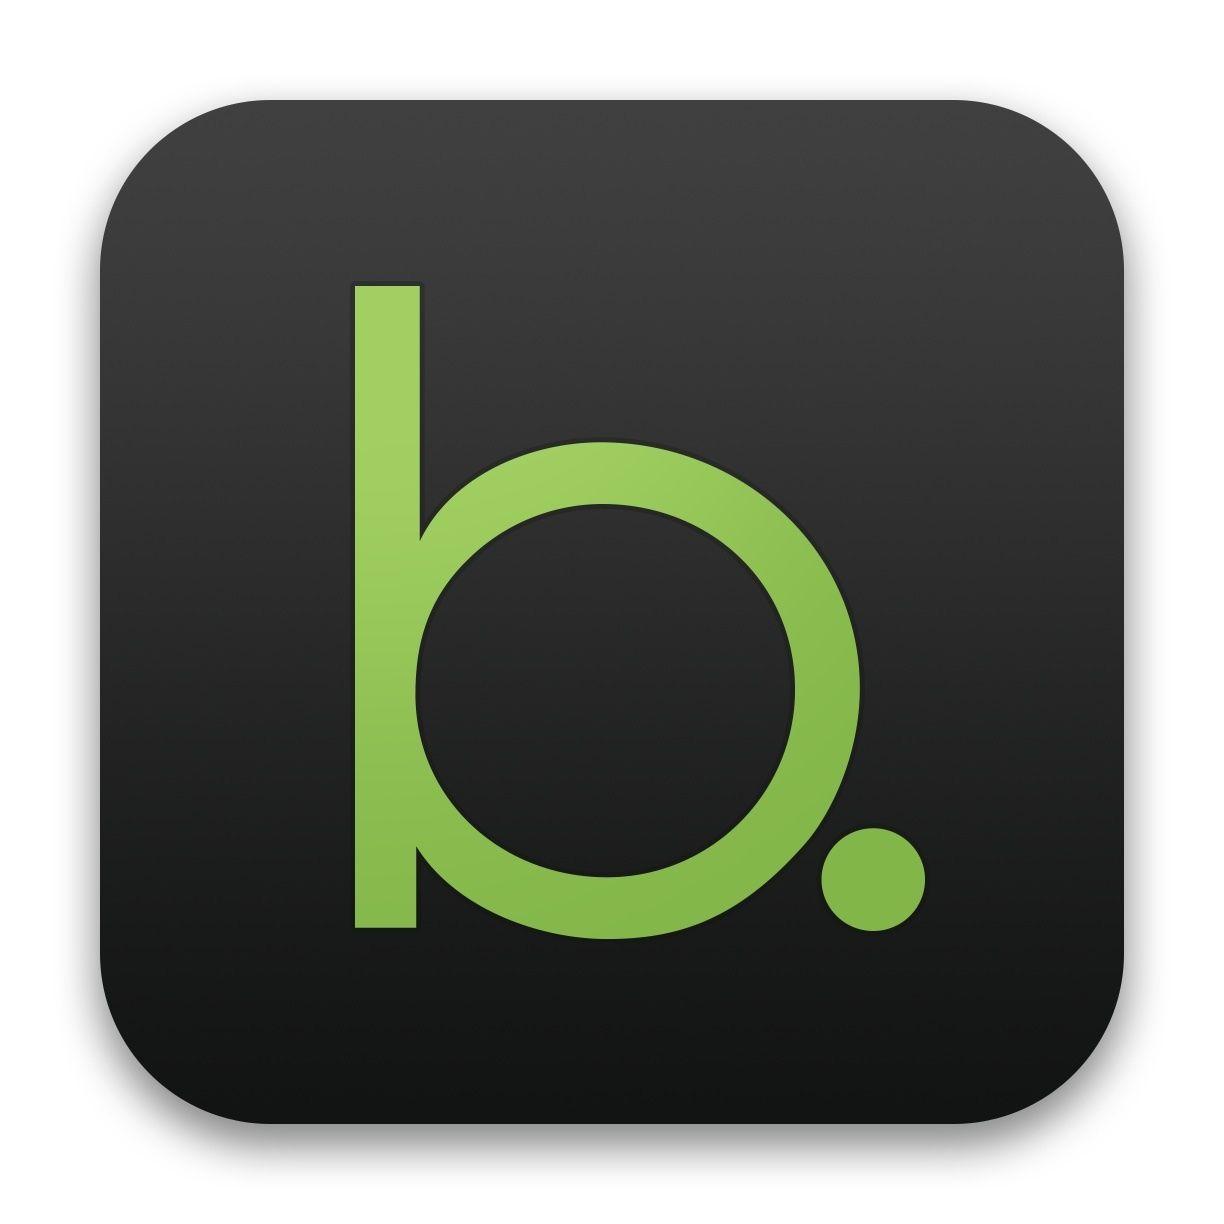 Groupon App Logo - Groupon Expands Point-of-Sale Suite with New Breadcrumb iPad App ...